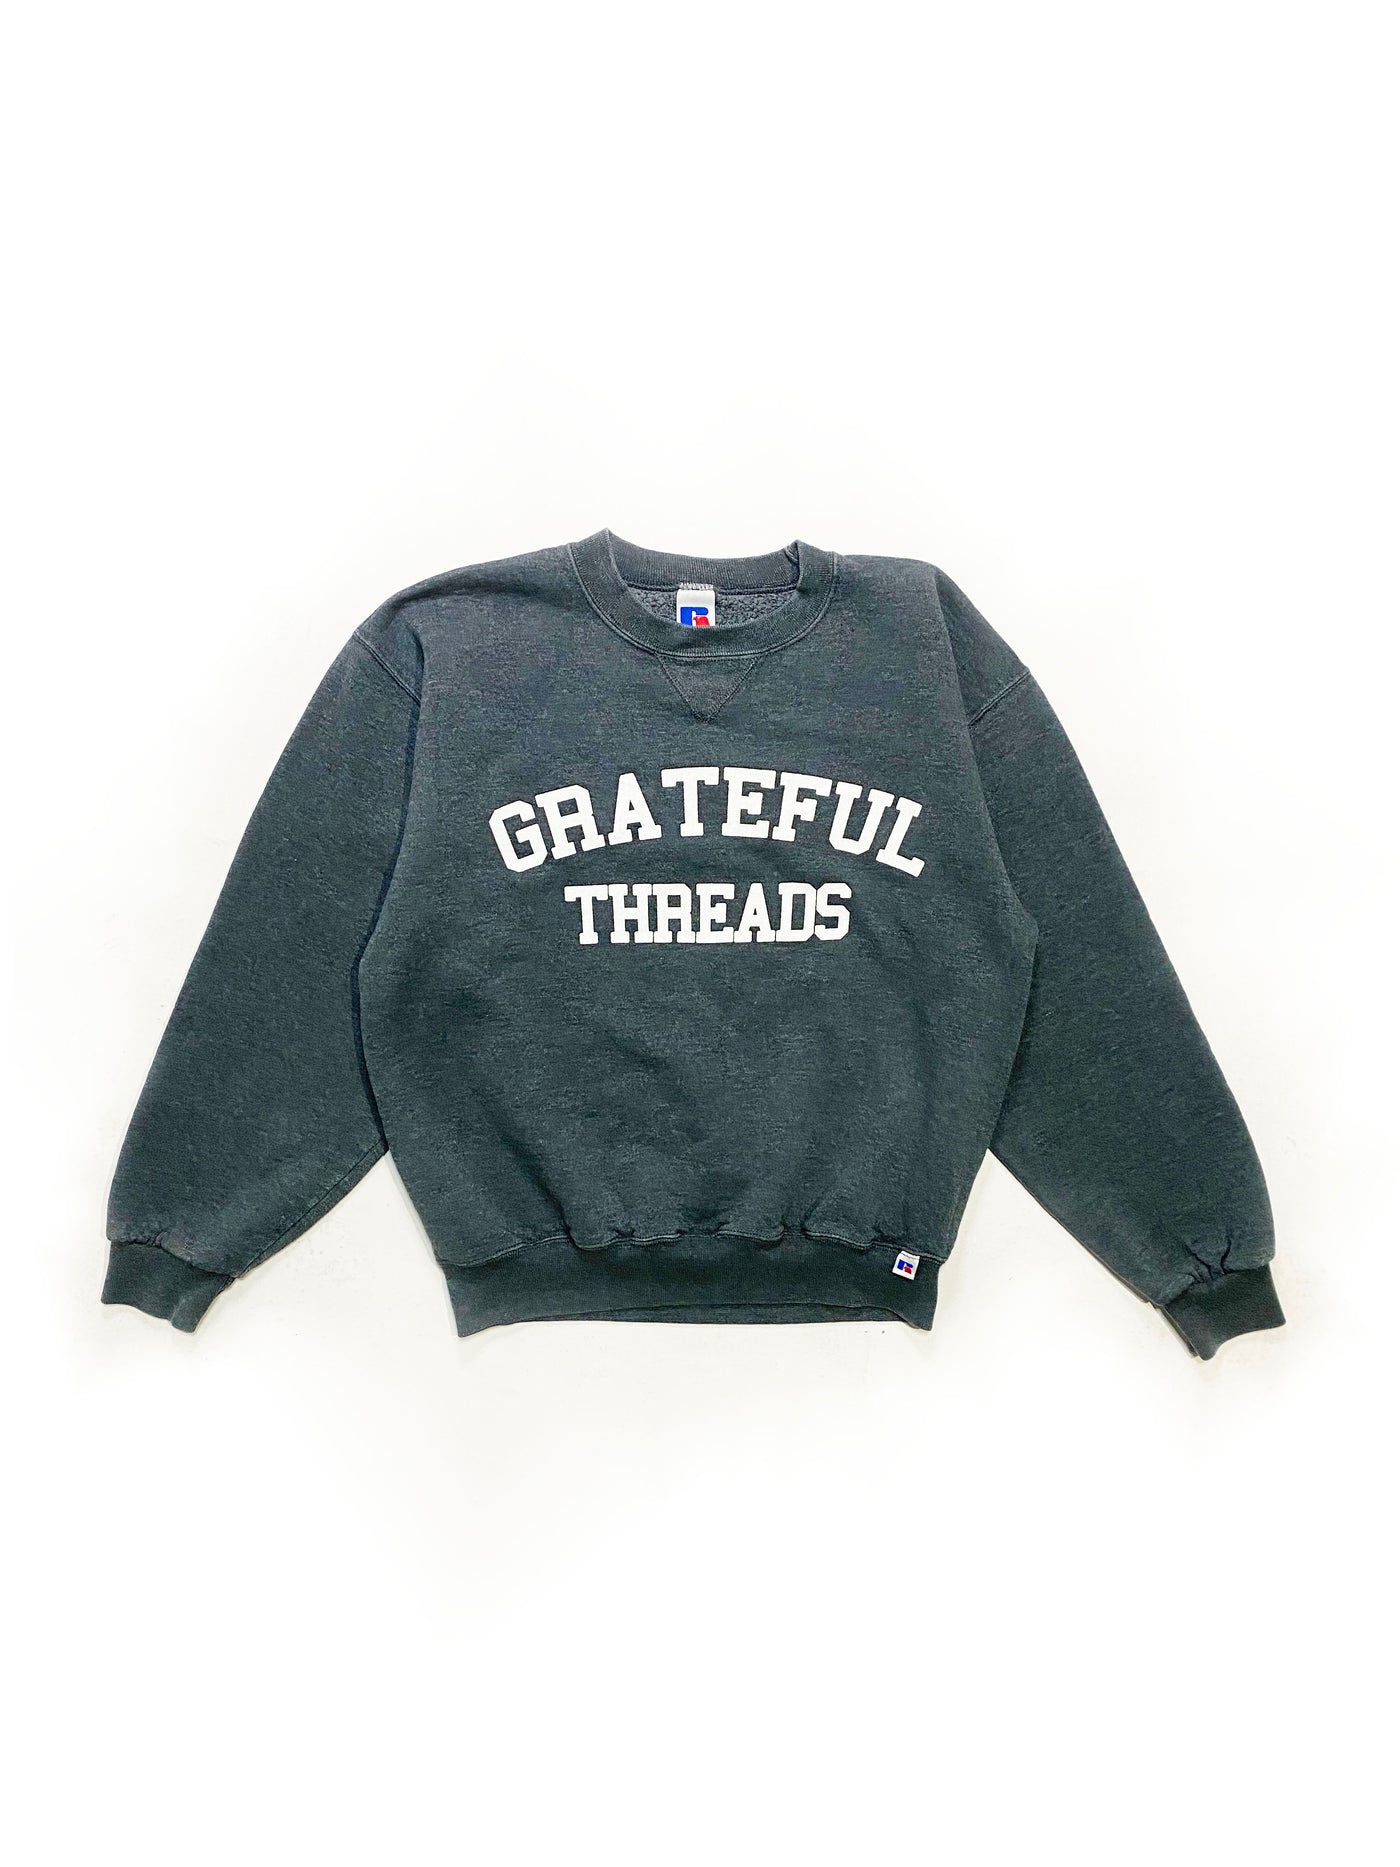 90s Russell Grateful Threads Spellout Crewneck - Gray - Size M